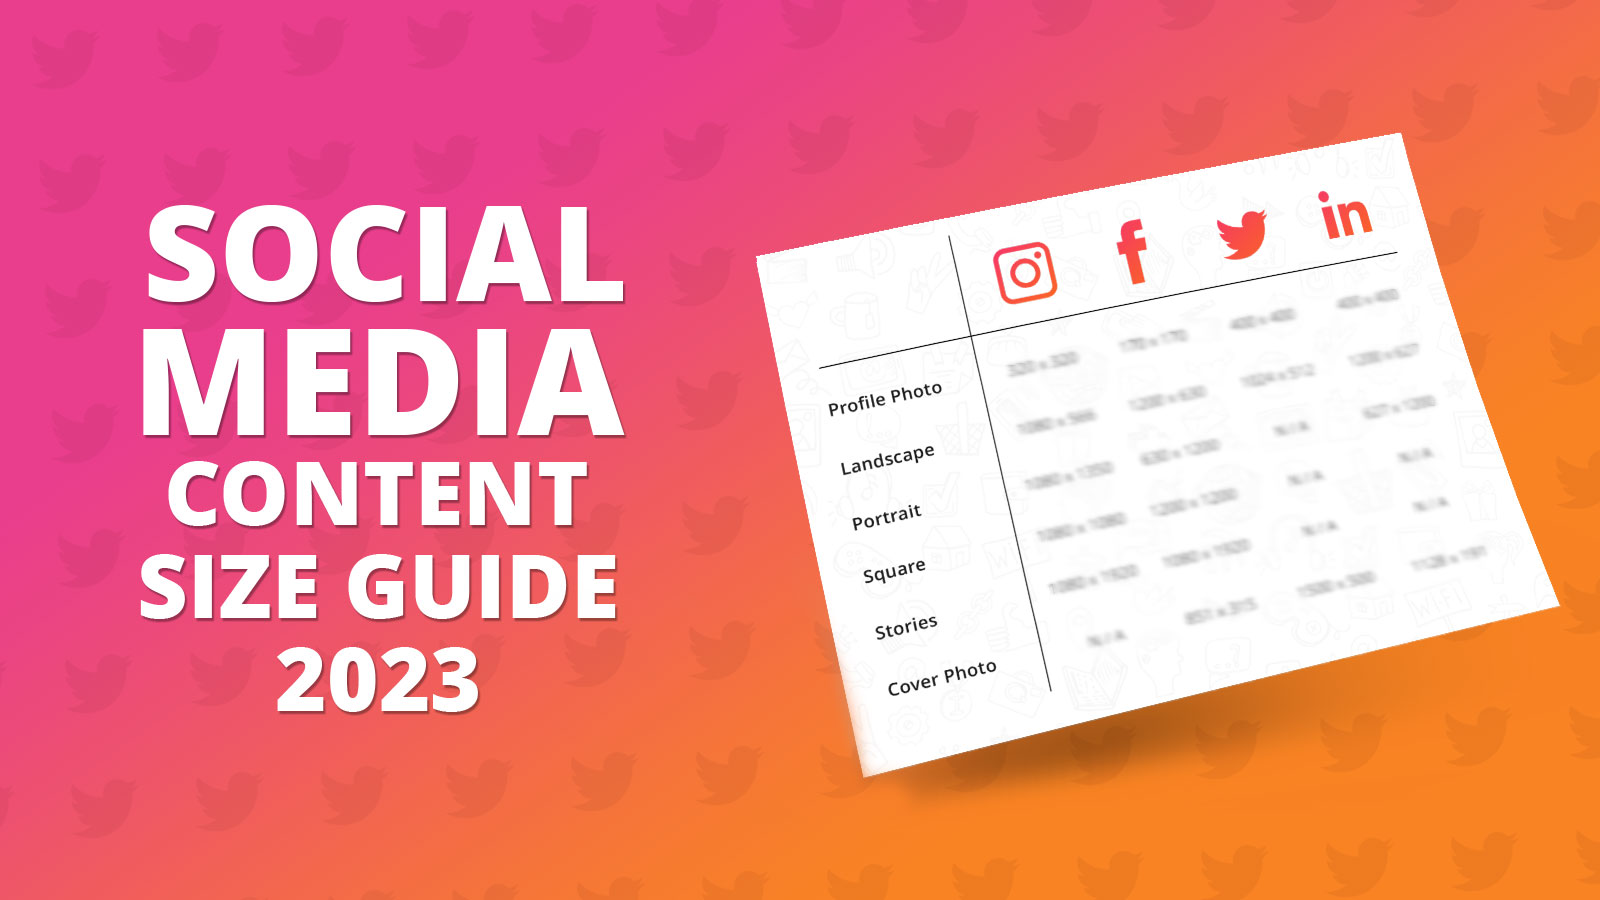 Social Media Content Size Guide 2023